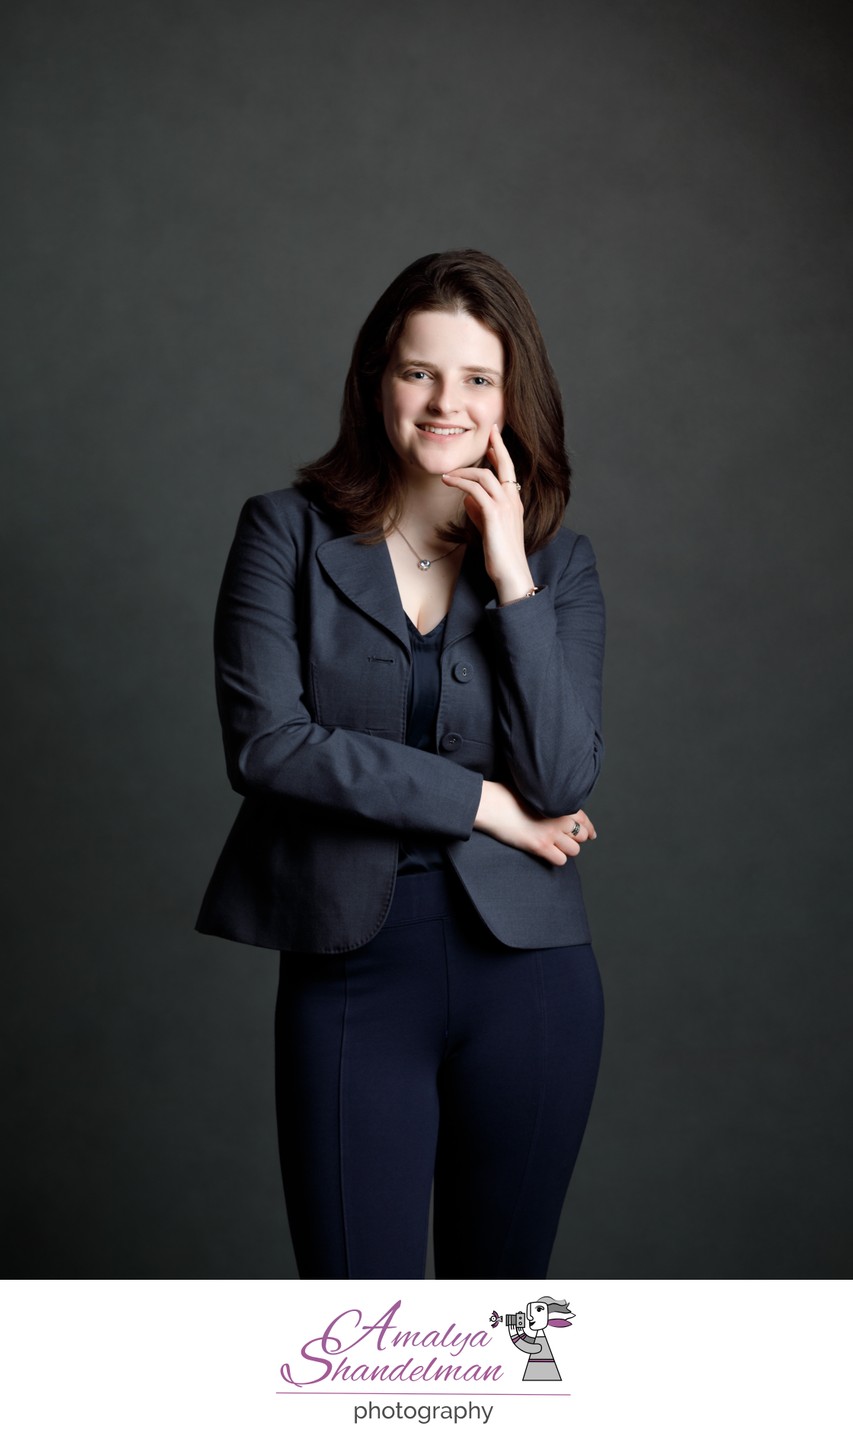 Professional Portrait Can Boost Your Career as a Young Businesswoman